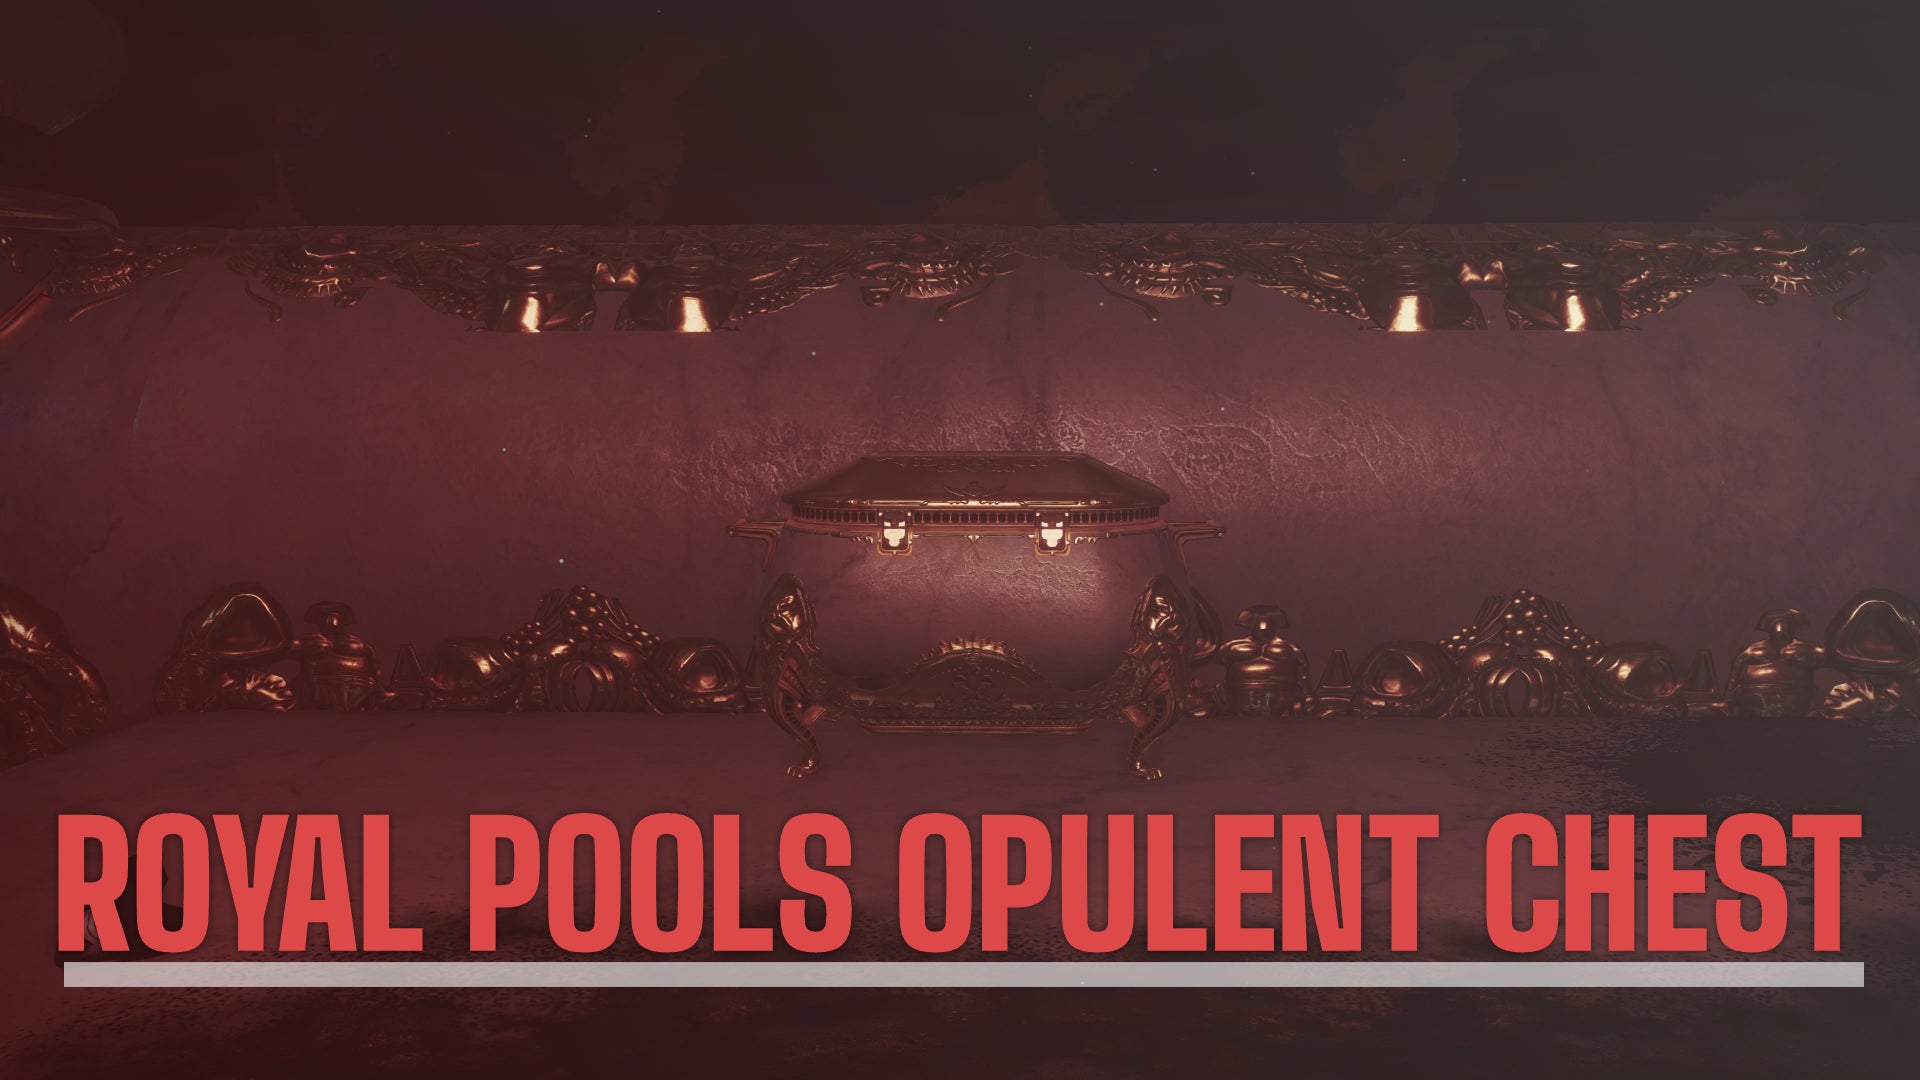 Header for the Opulent chest in the Royale Pools.